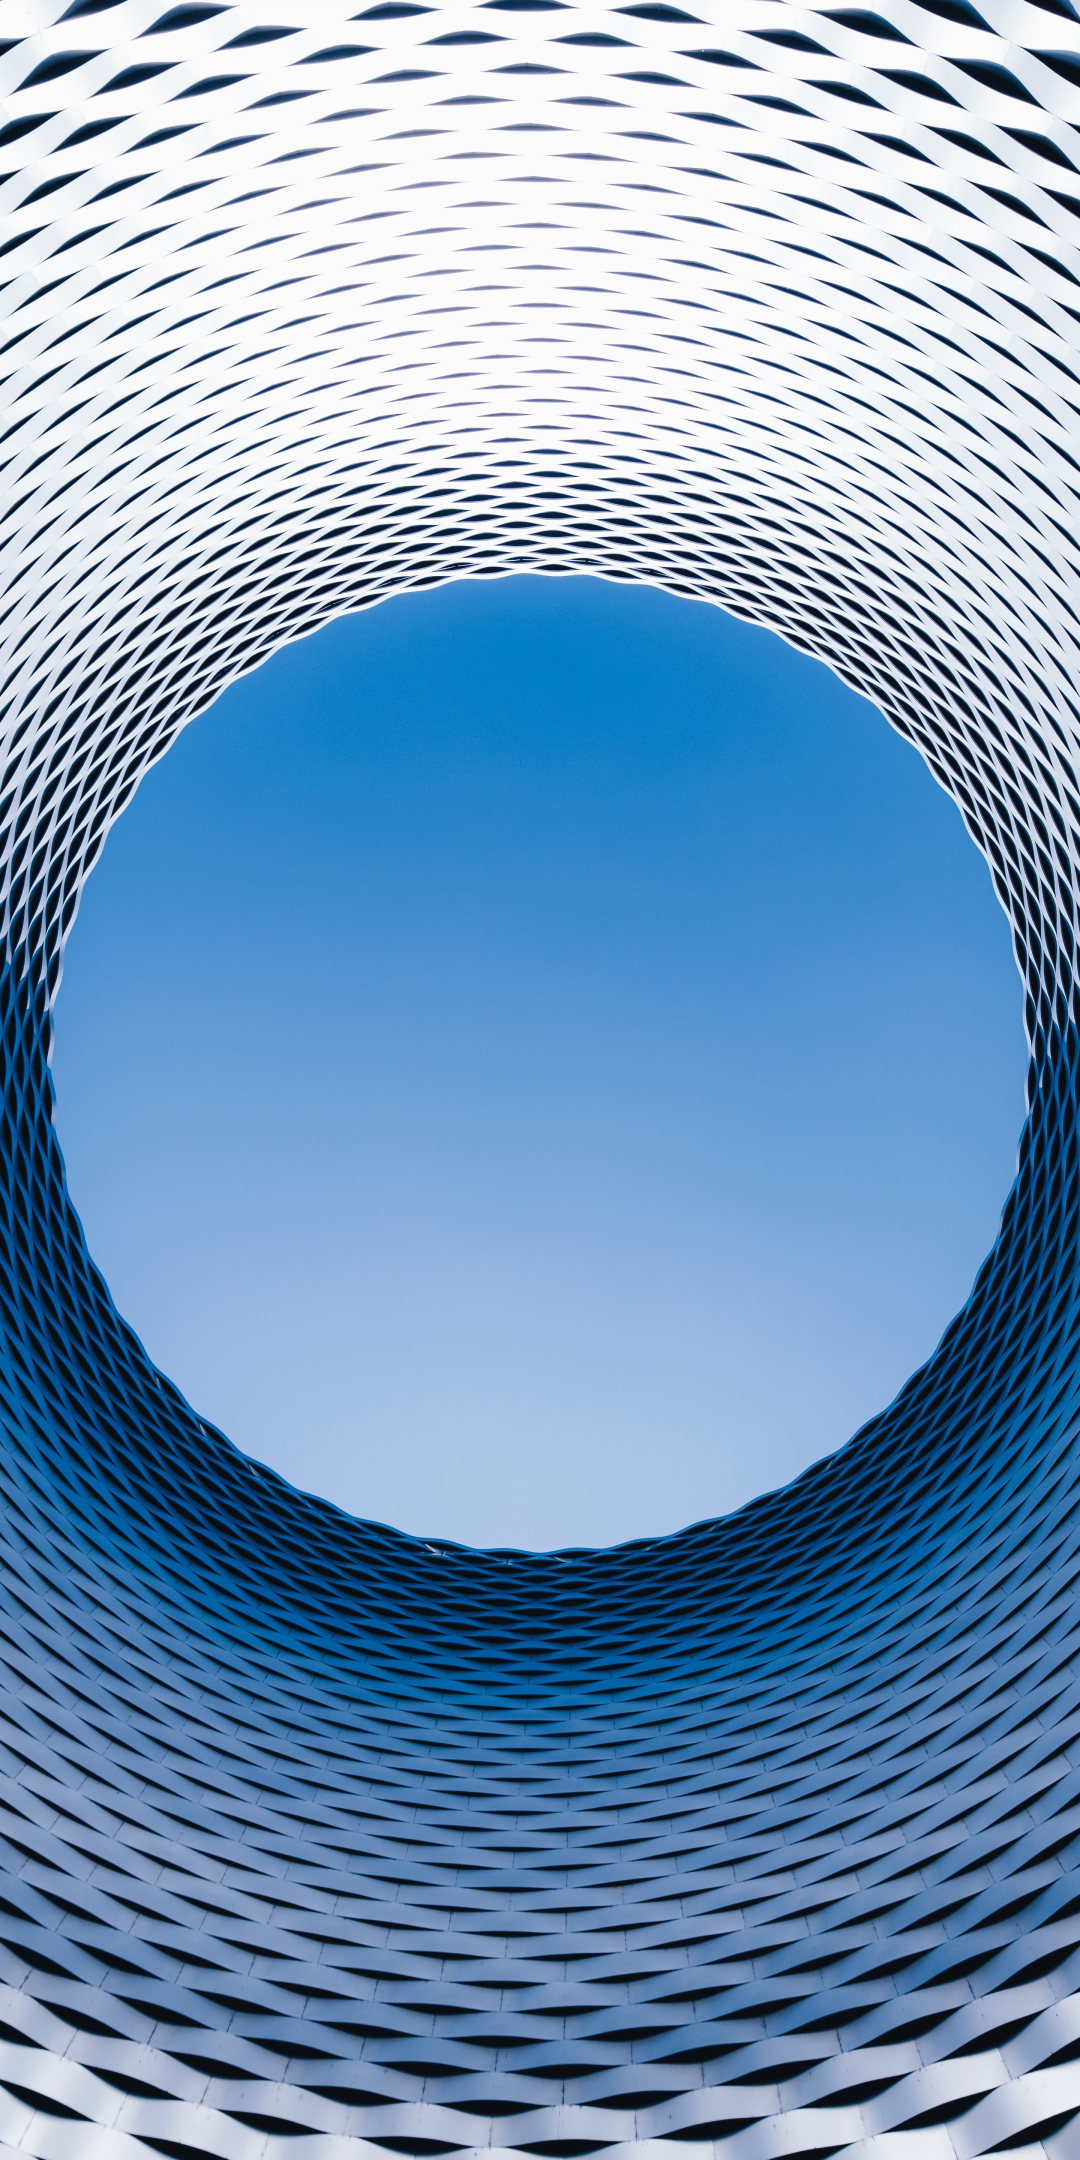 Basel Exhibition Center, architecture, spiral surface, building, 1080x2160 wallpaper